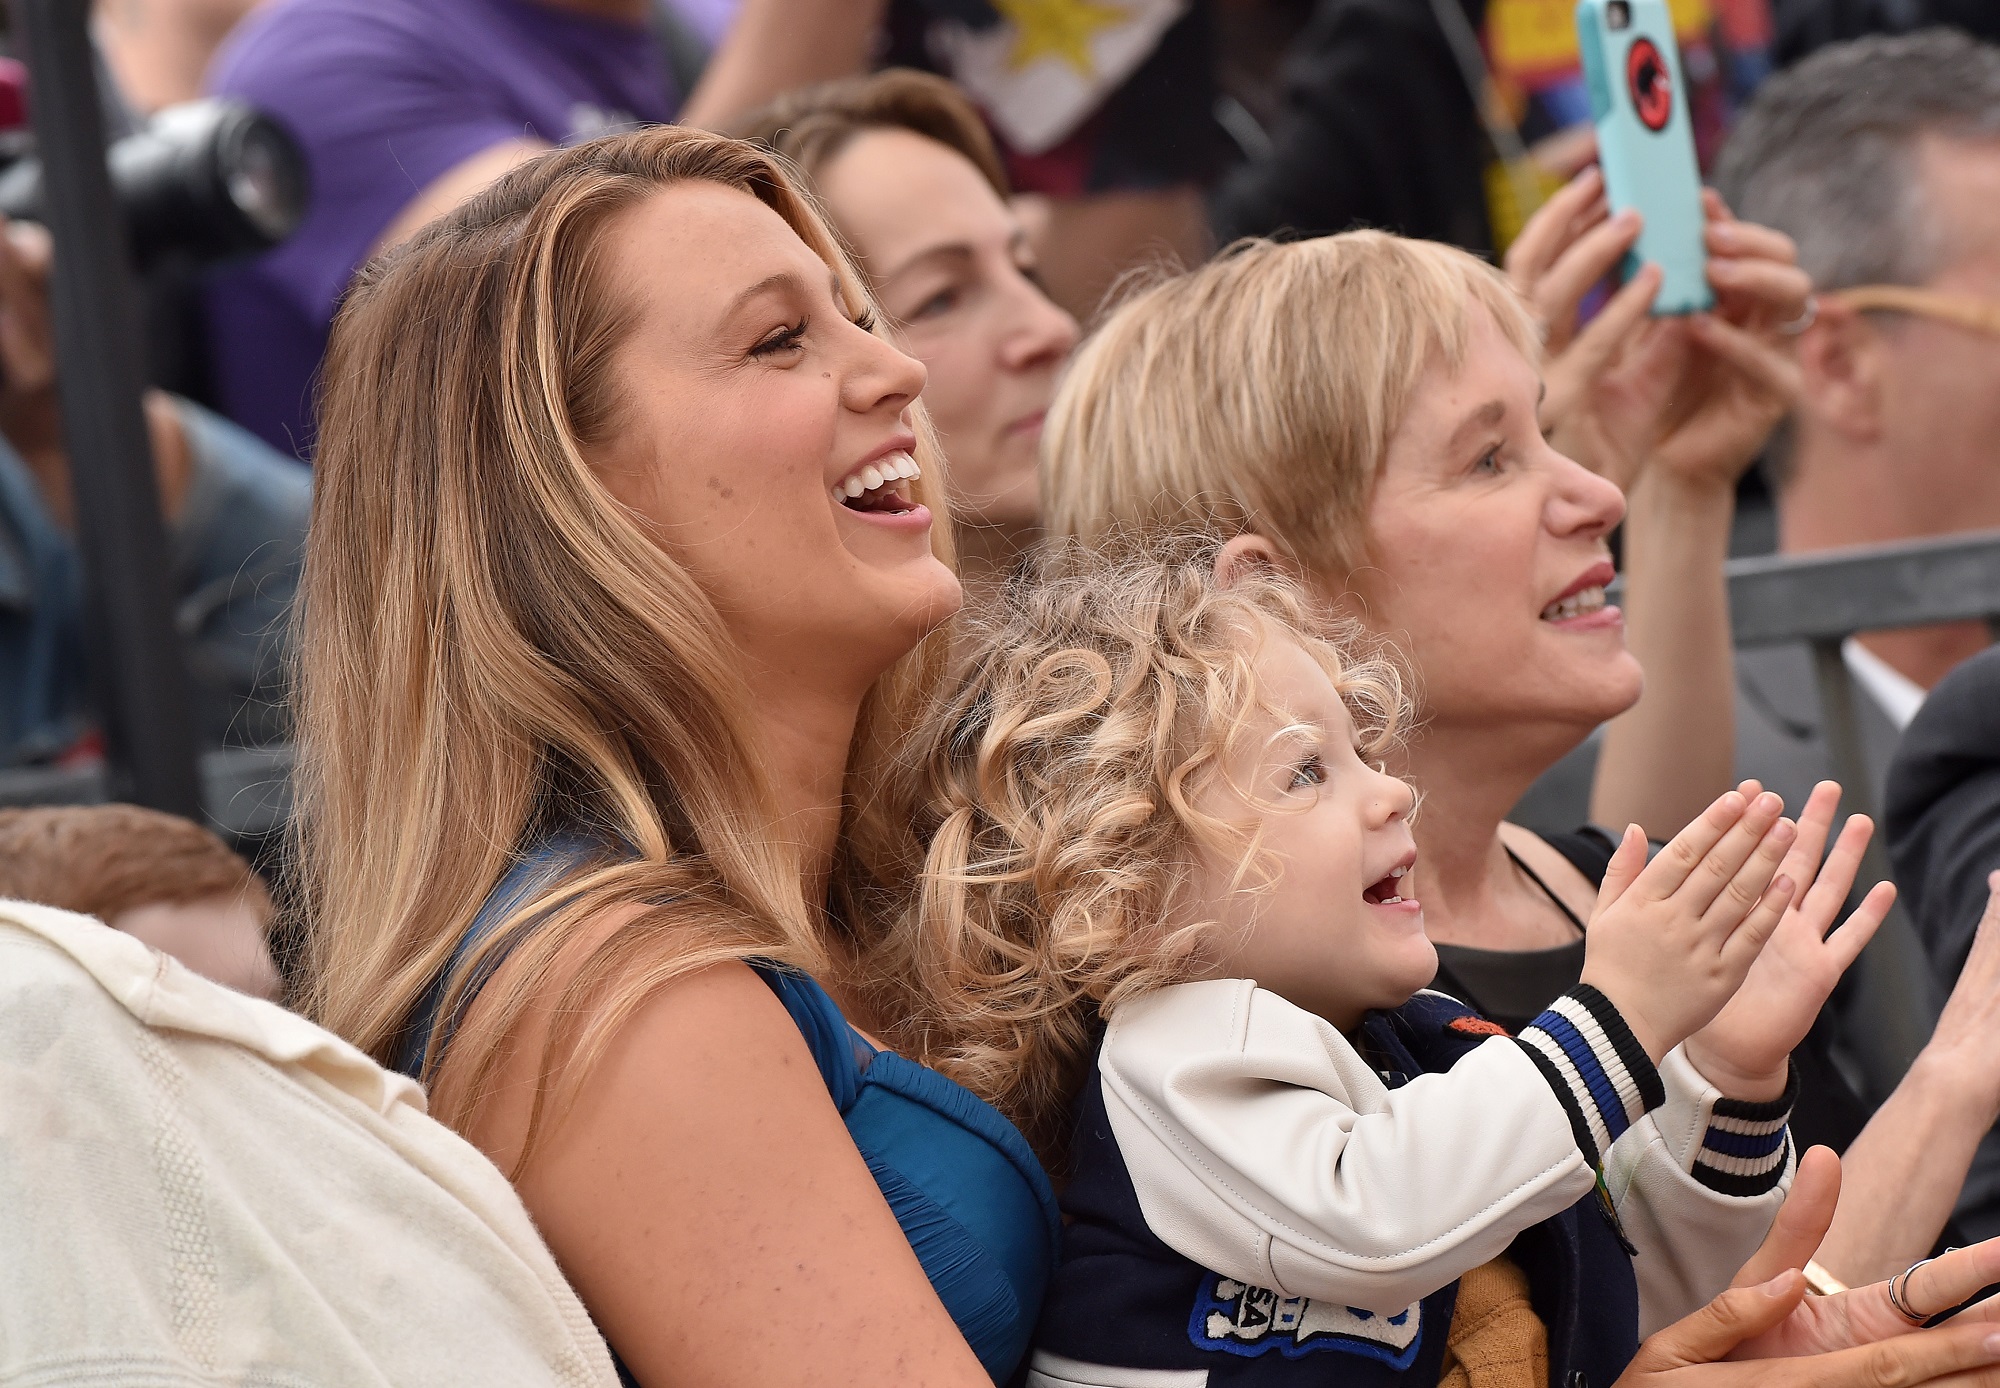 Blake Lively and daughter James Reynolds attend the ceremony honoring Ryan Reynolds with a Star on the Hollywood Walk of Fame on December 15, 2016 in Hollywood, California.